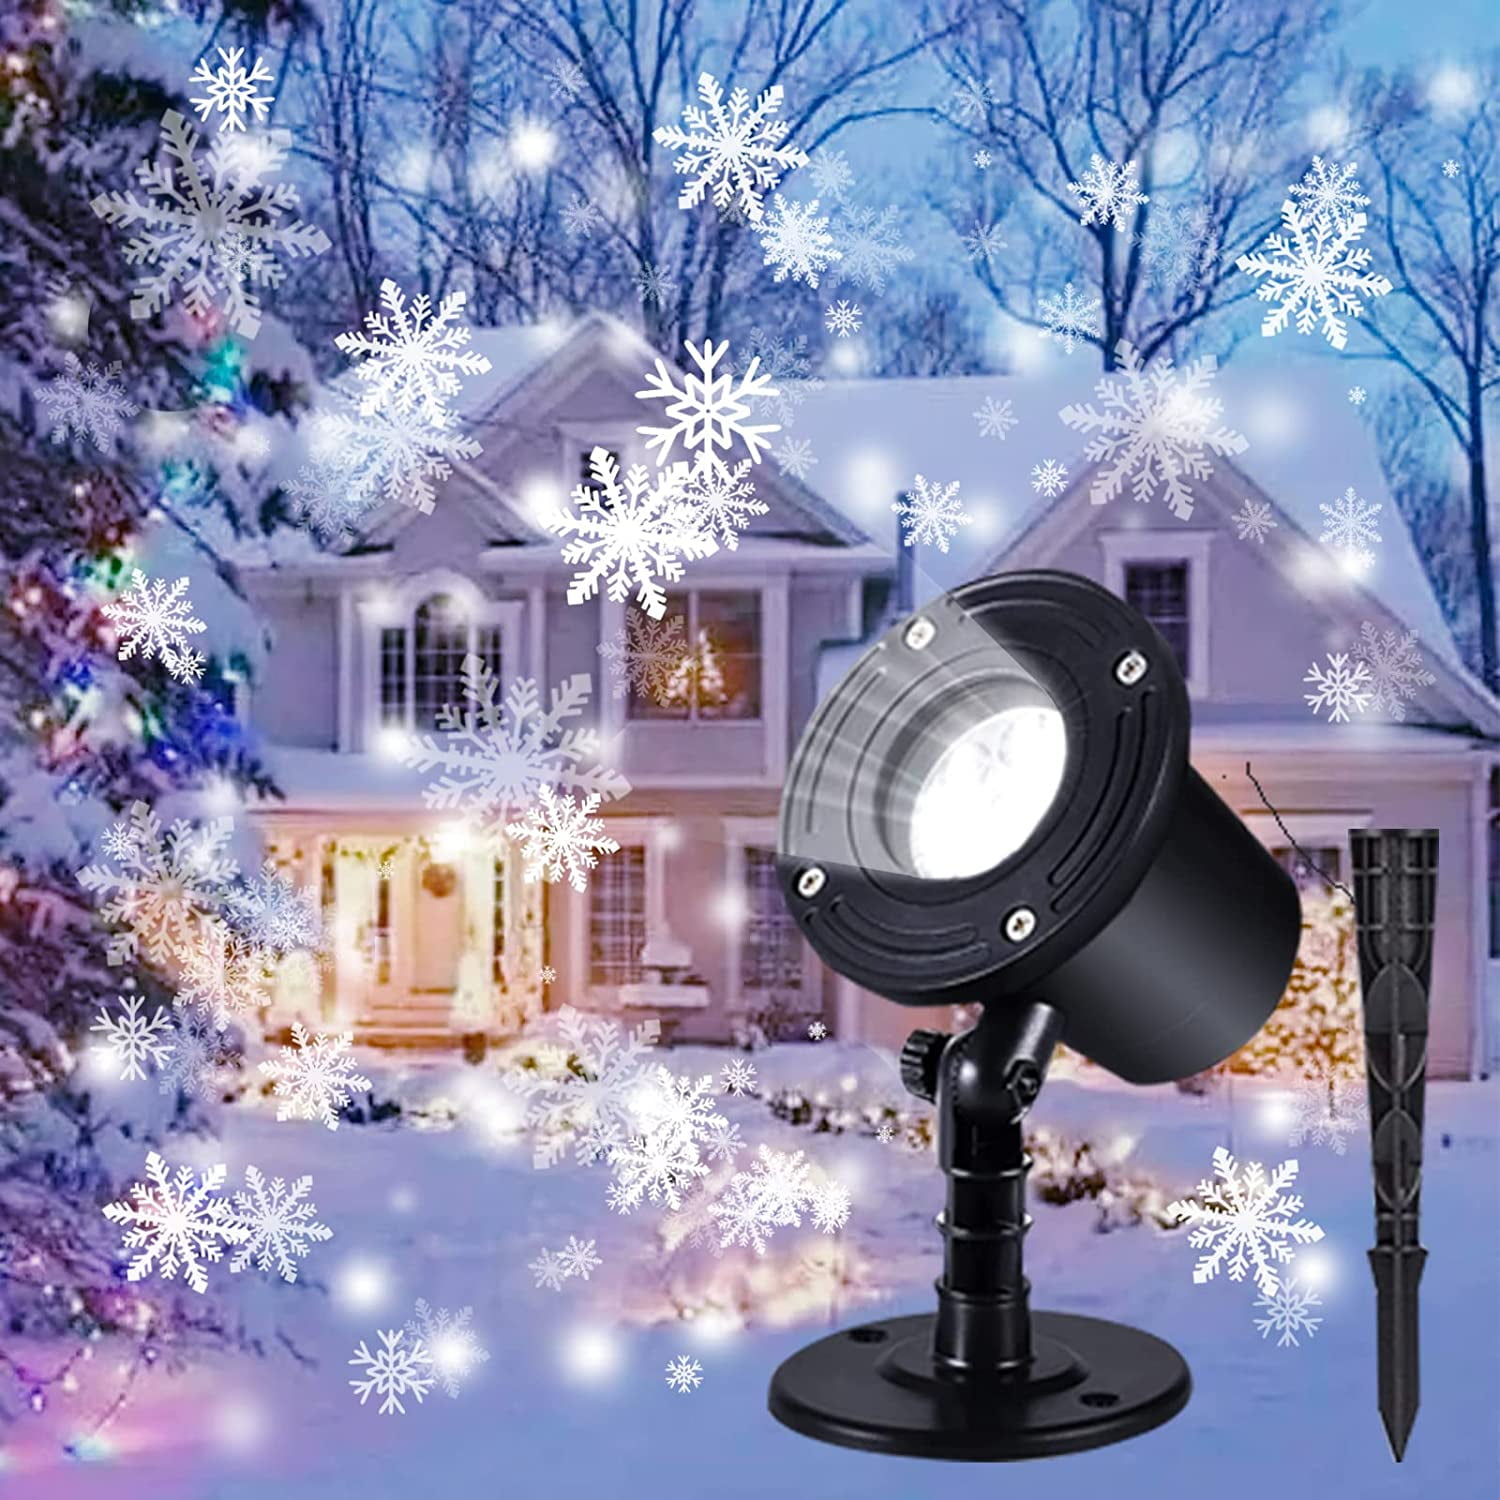 Waterproof Projection Light for Indoor & Outdoor Landscape Patio Garden Snowflake Snow Fall Projector Light for Christmas Party